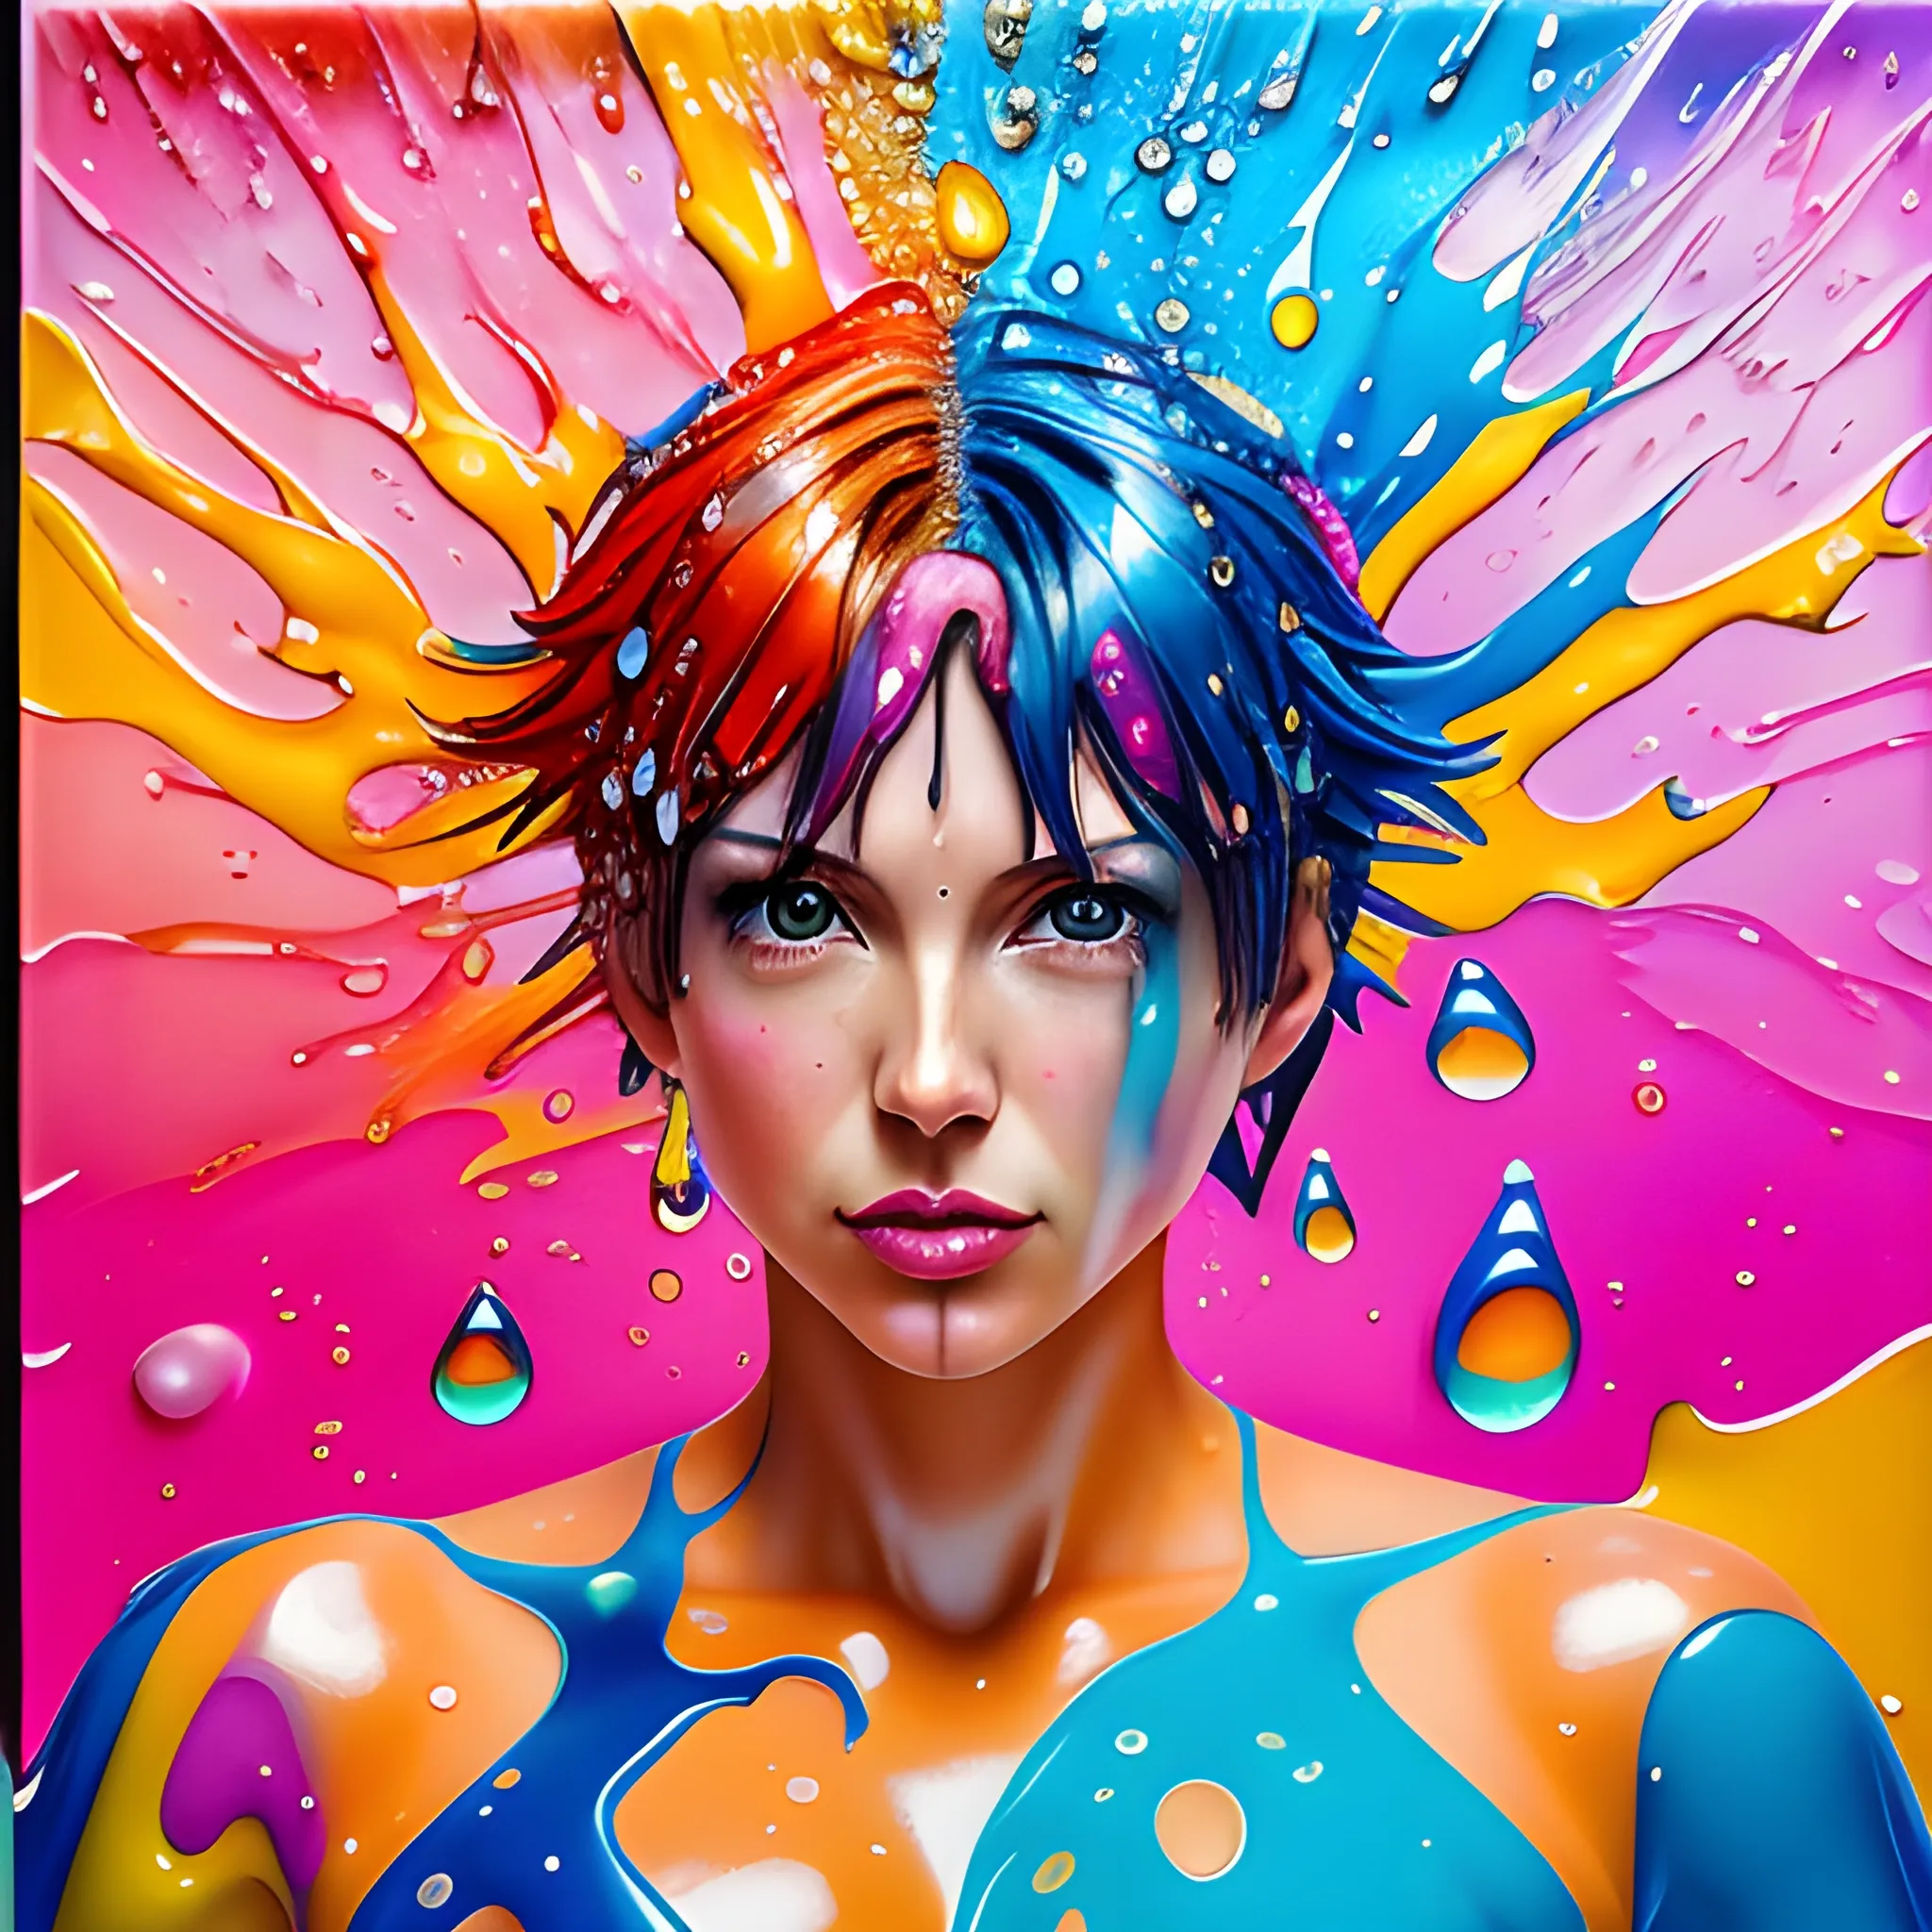 A David lachapelle modern colorful melting glass, water droplets and dust splash anime makoto oil painting of a supermodel female, toyism, oil painting without frame, keygen, looking hot, strong engineer style, unsplash